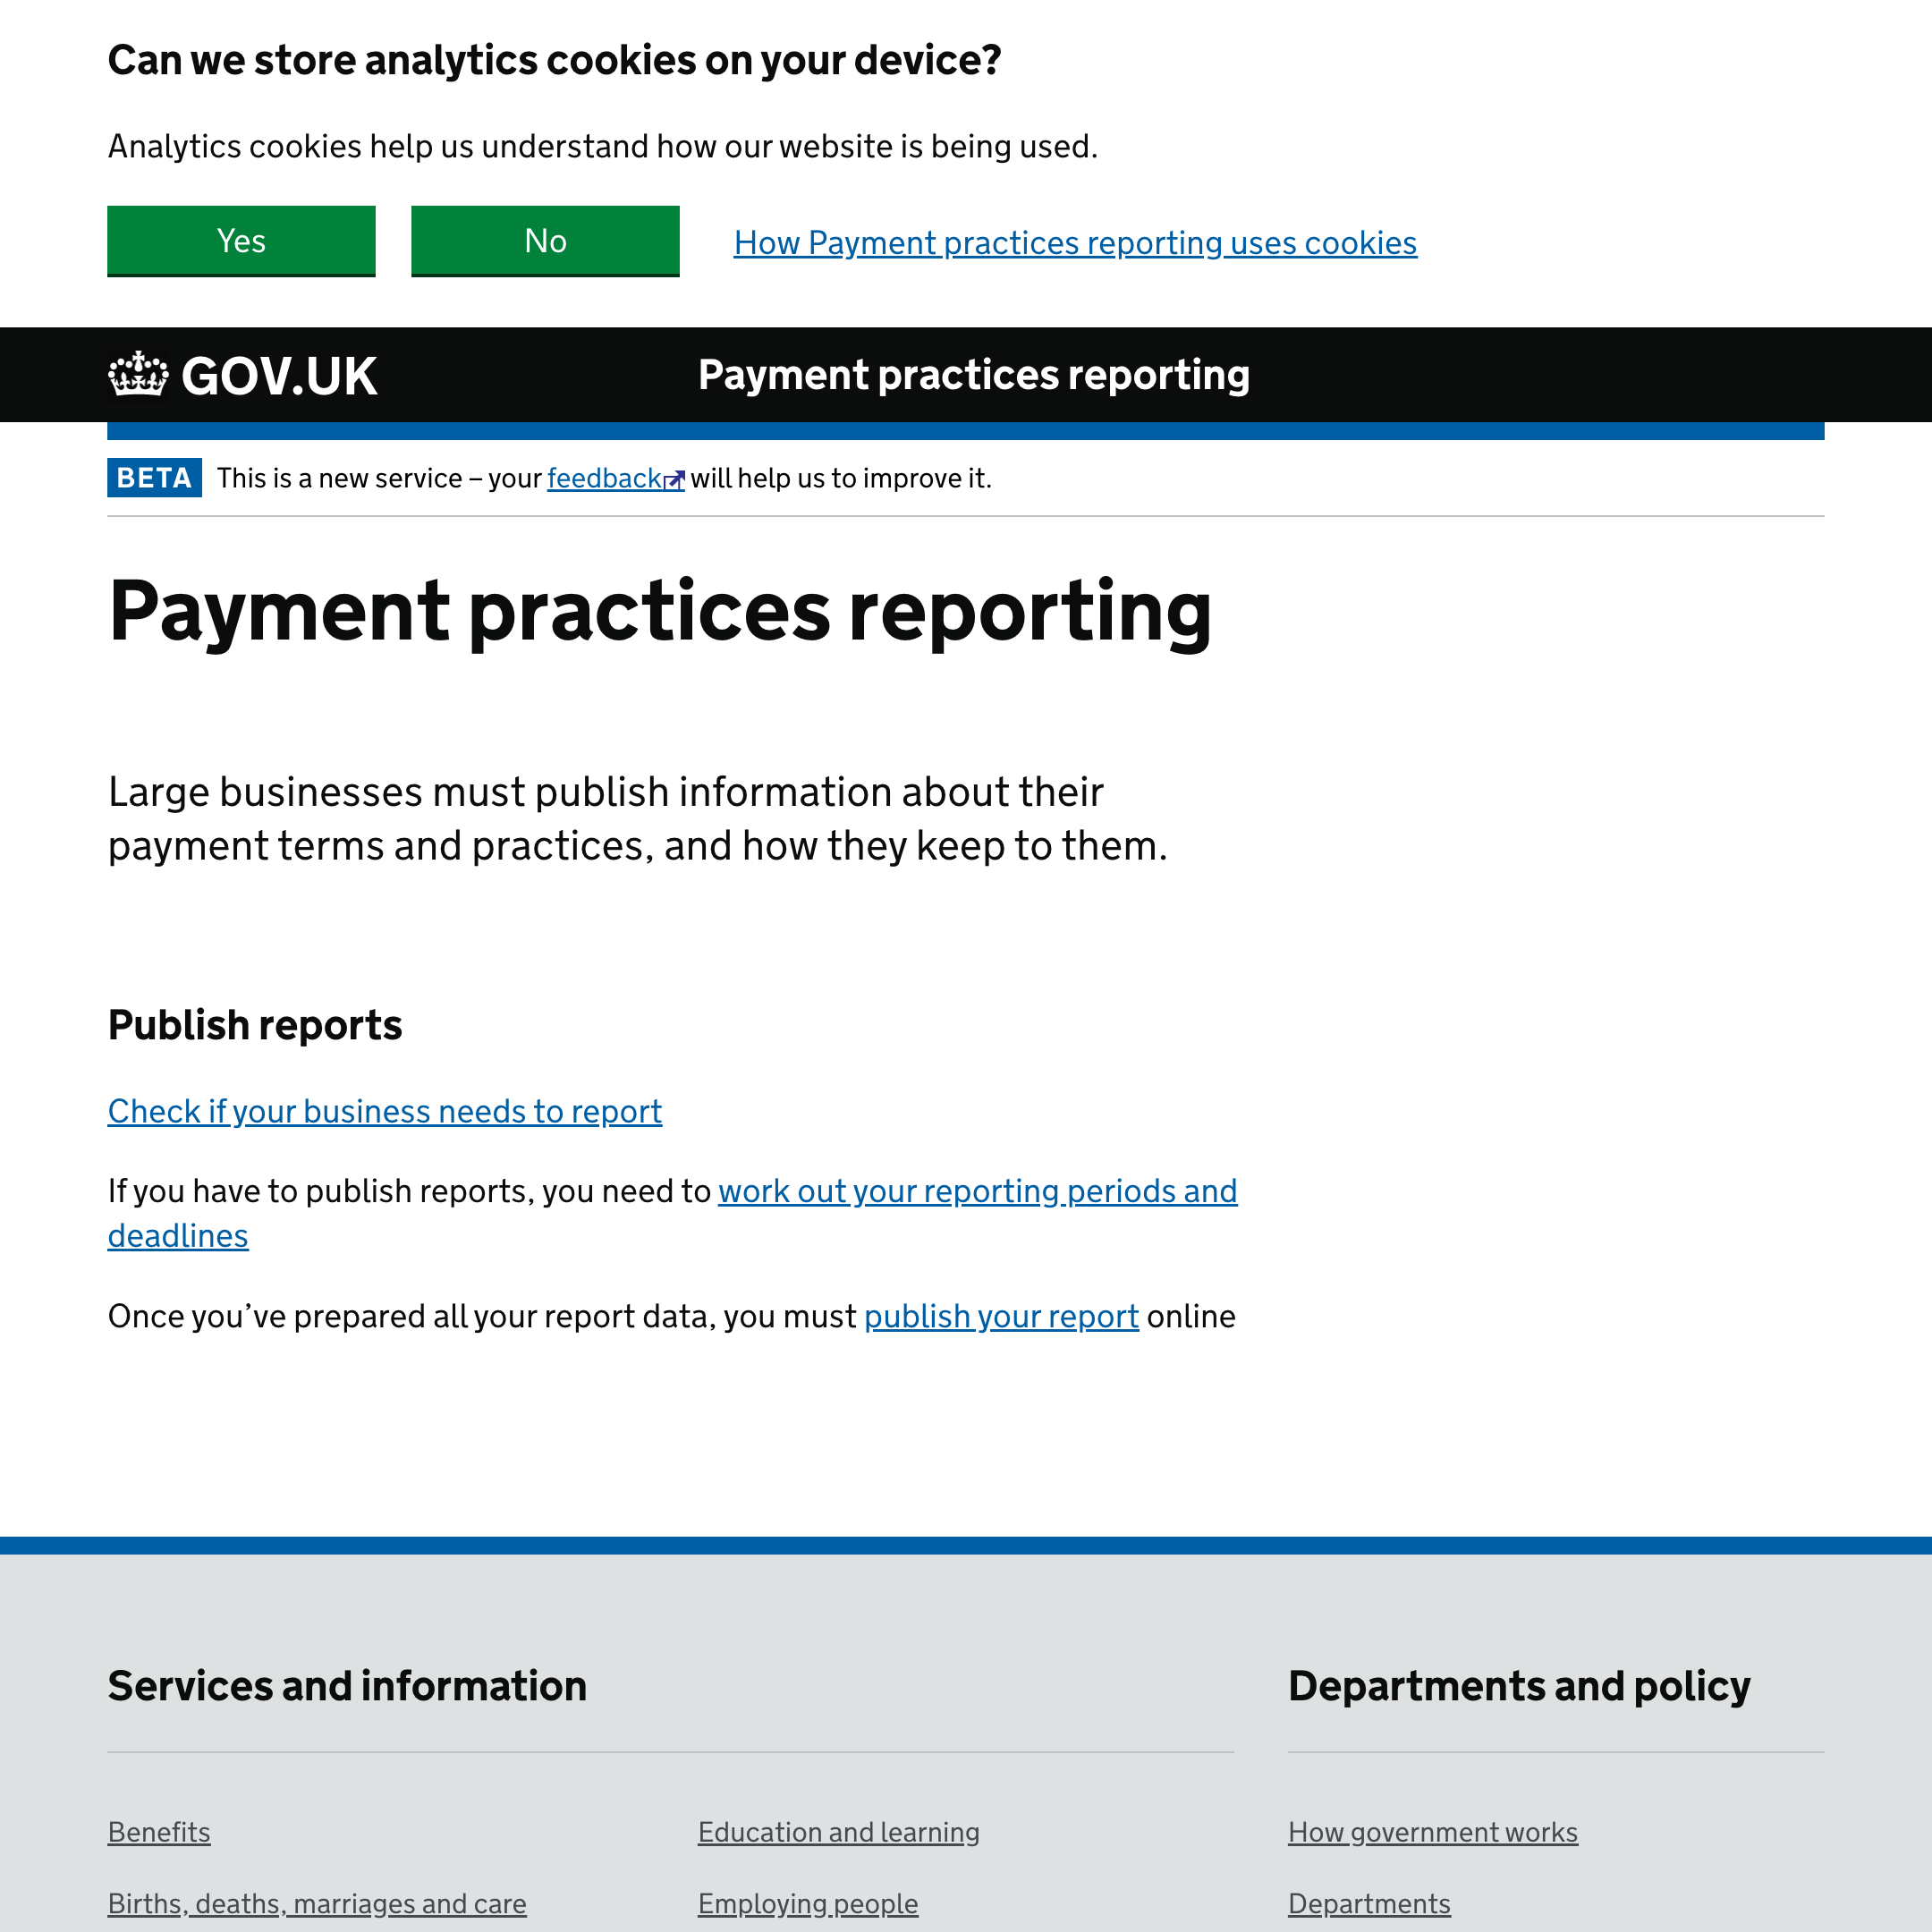 Payment practices reporting